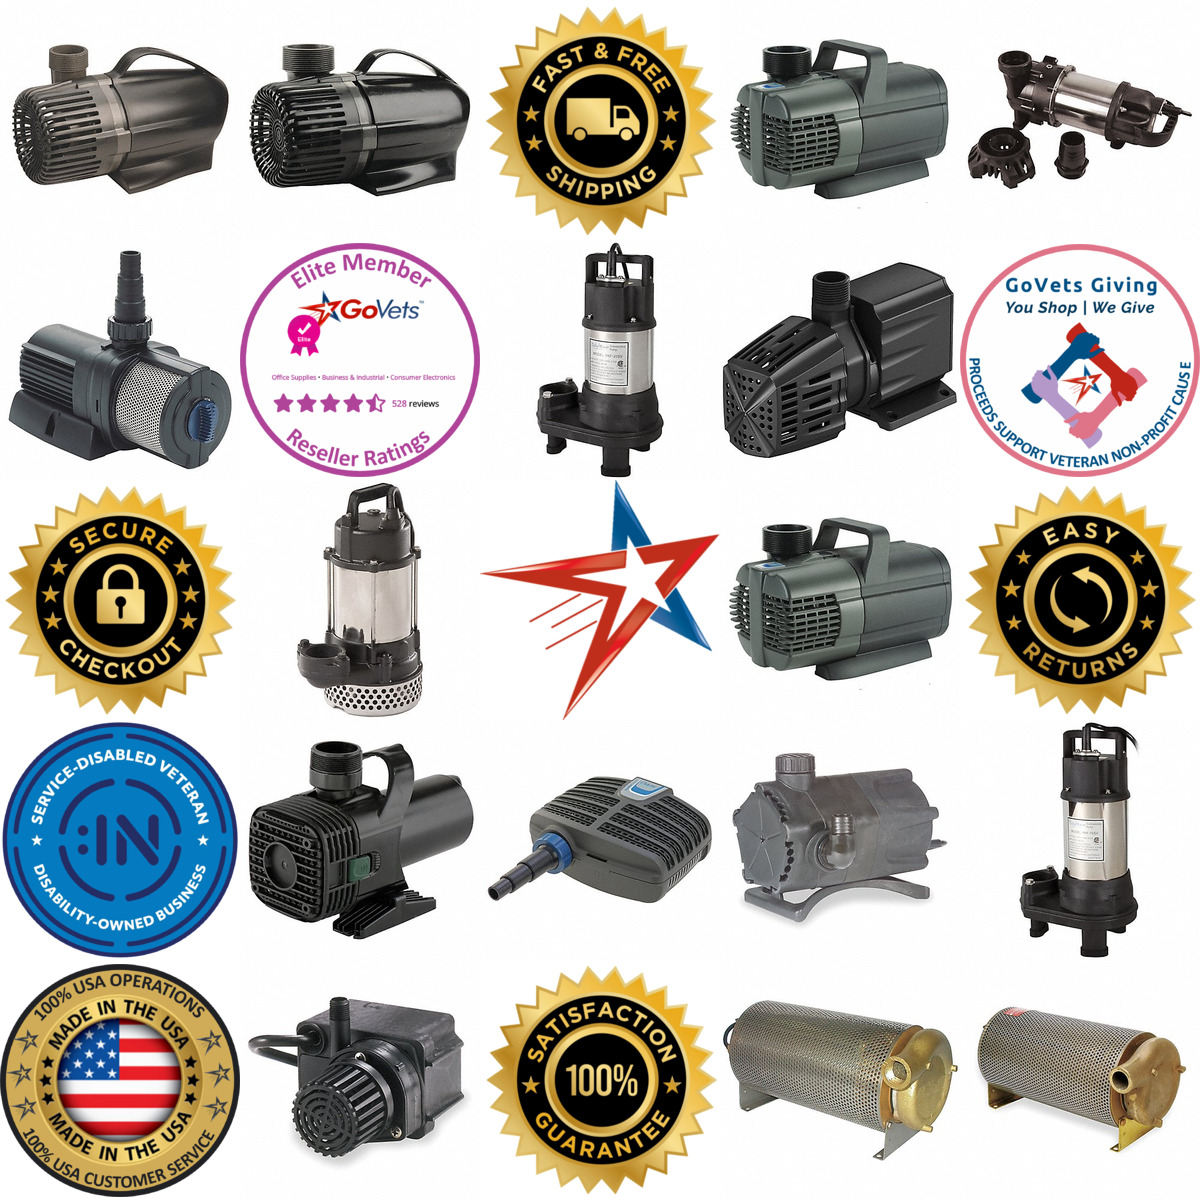 A selection of Pond and Waterfall Pumps products on GoVets